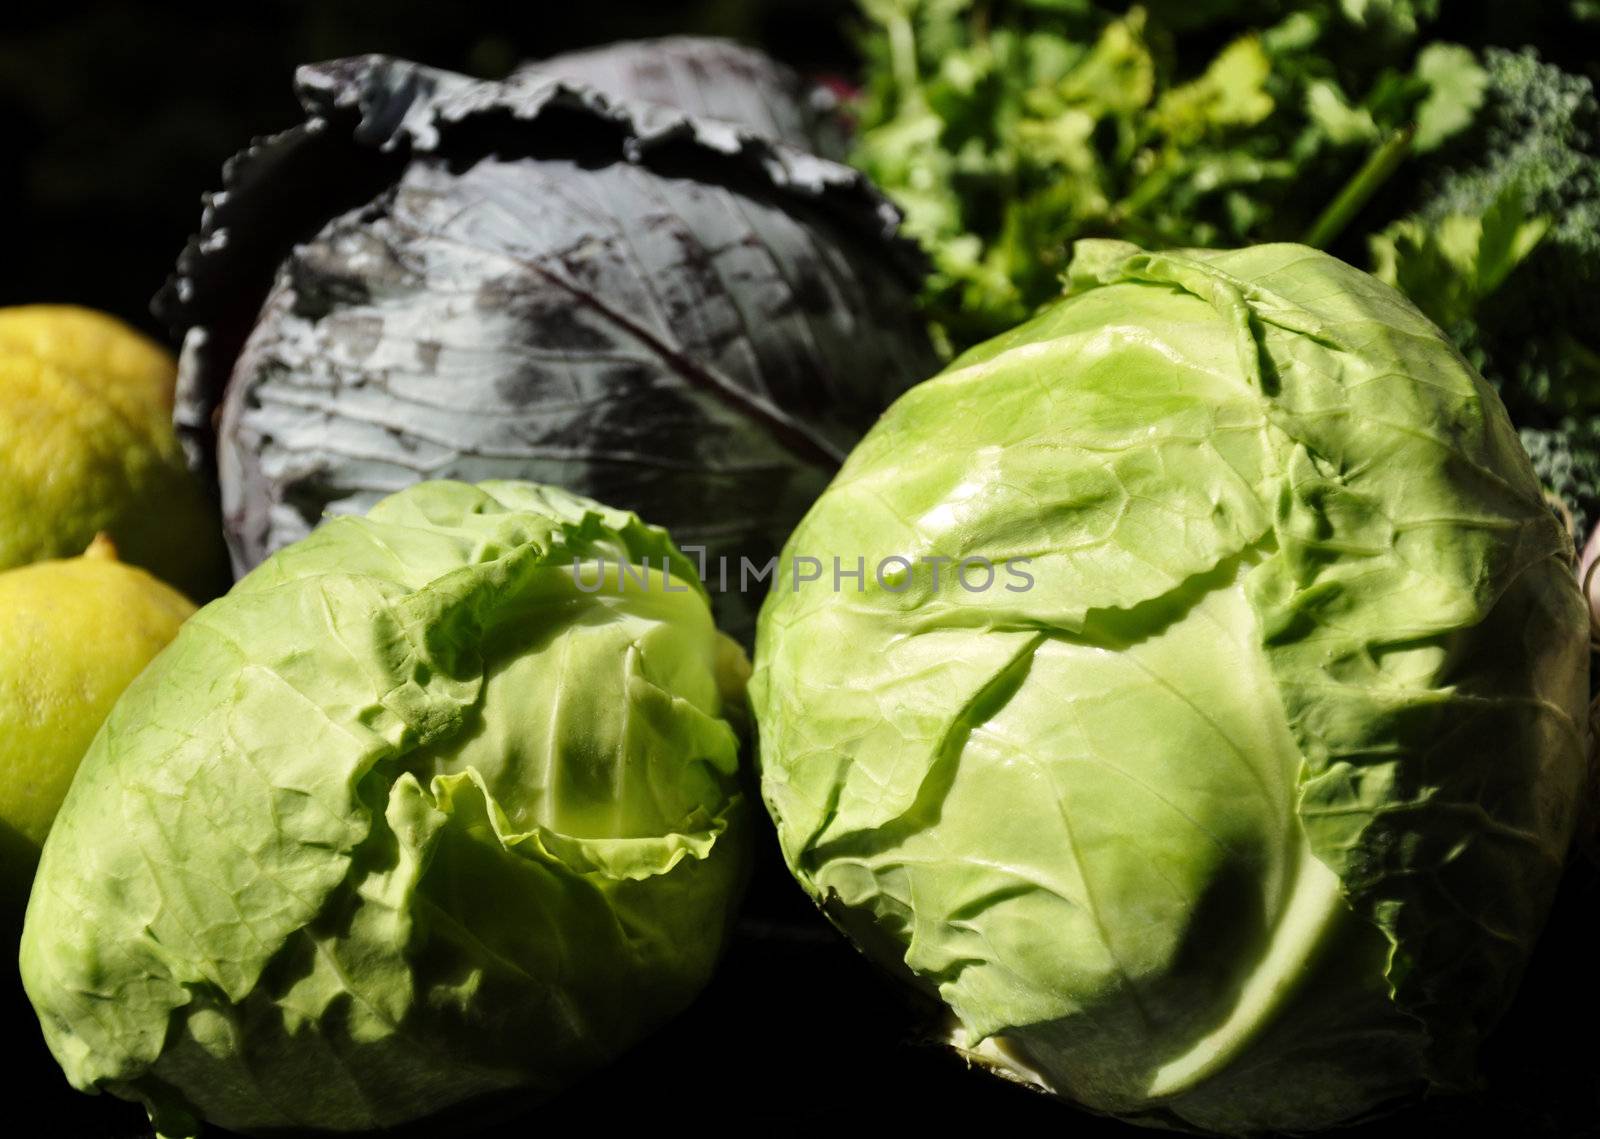 Green Cabbage and Red Cabbage by kdreams02